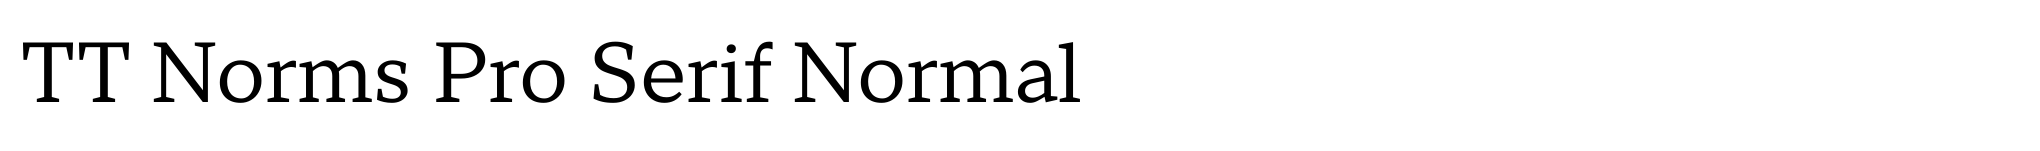 TT Norms Pro Serif Normal image